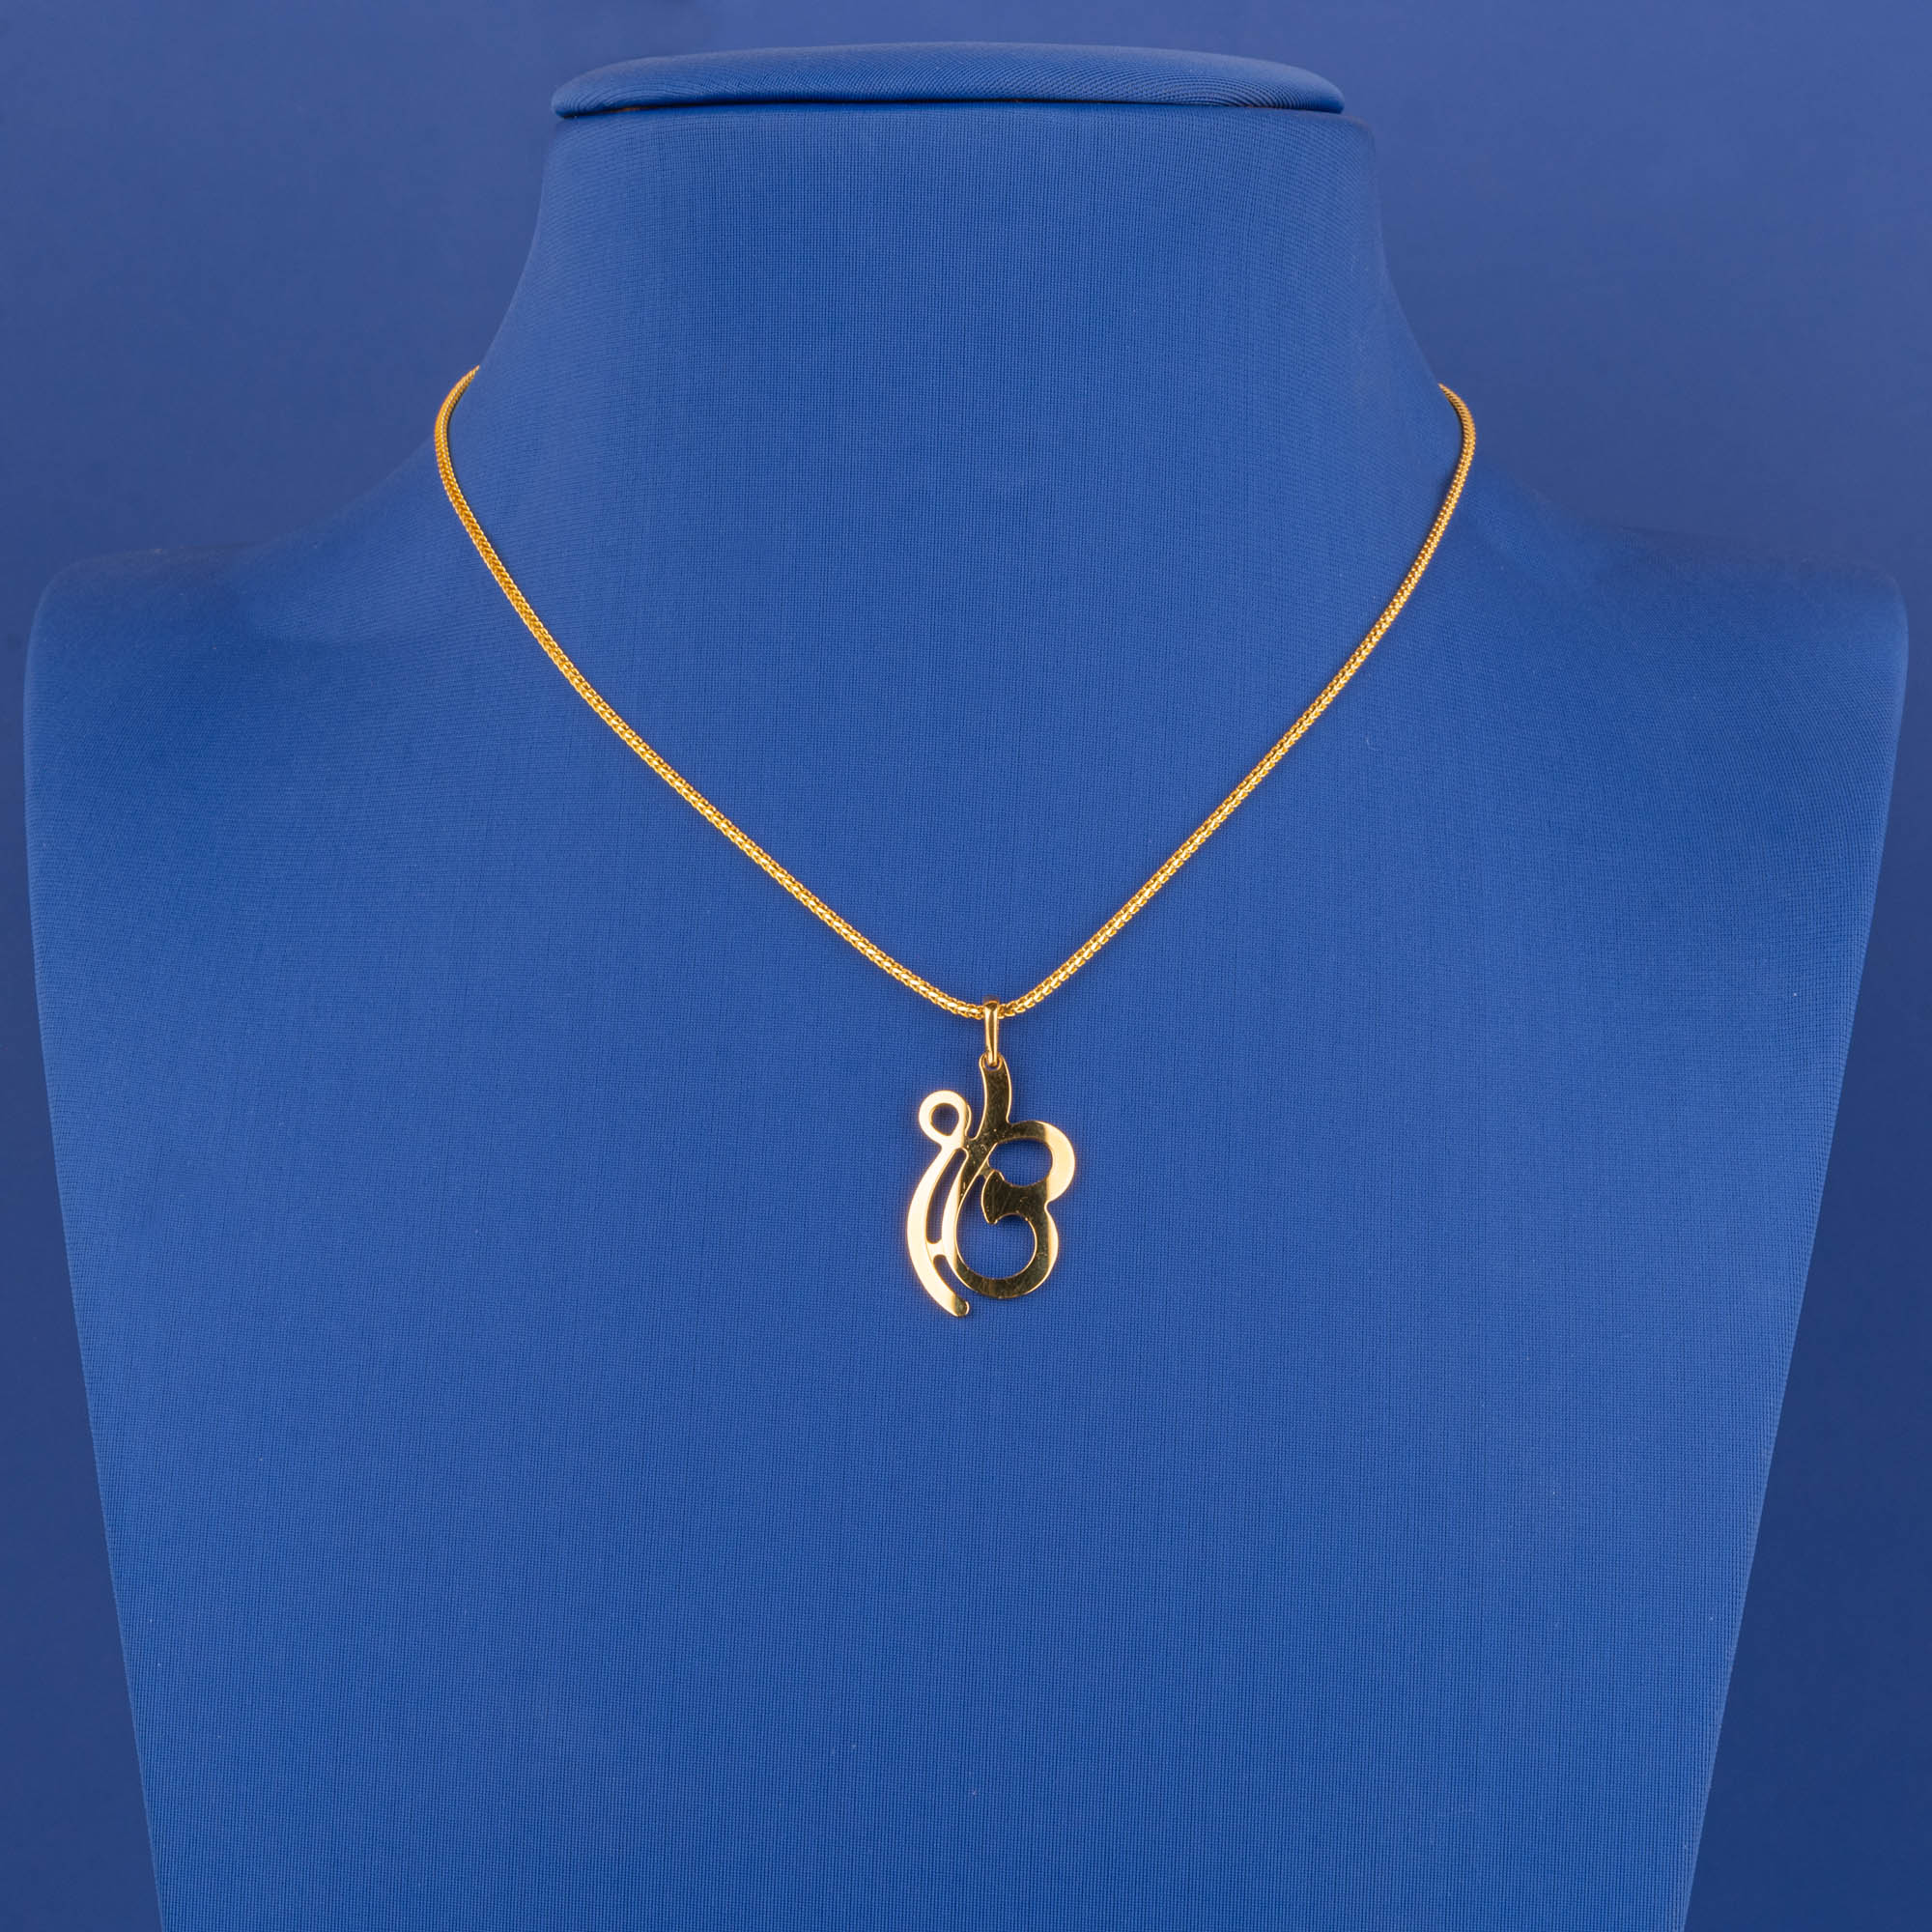 Breathtaking Beauty: Handcrafted 22K Gold Pendant with B-Shaped Design (chain not included)